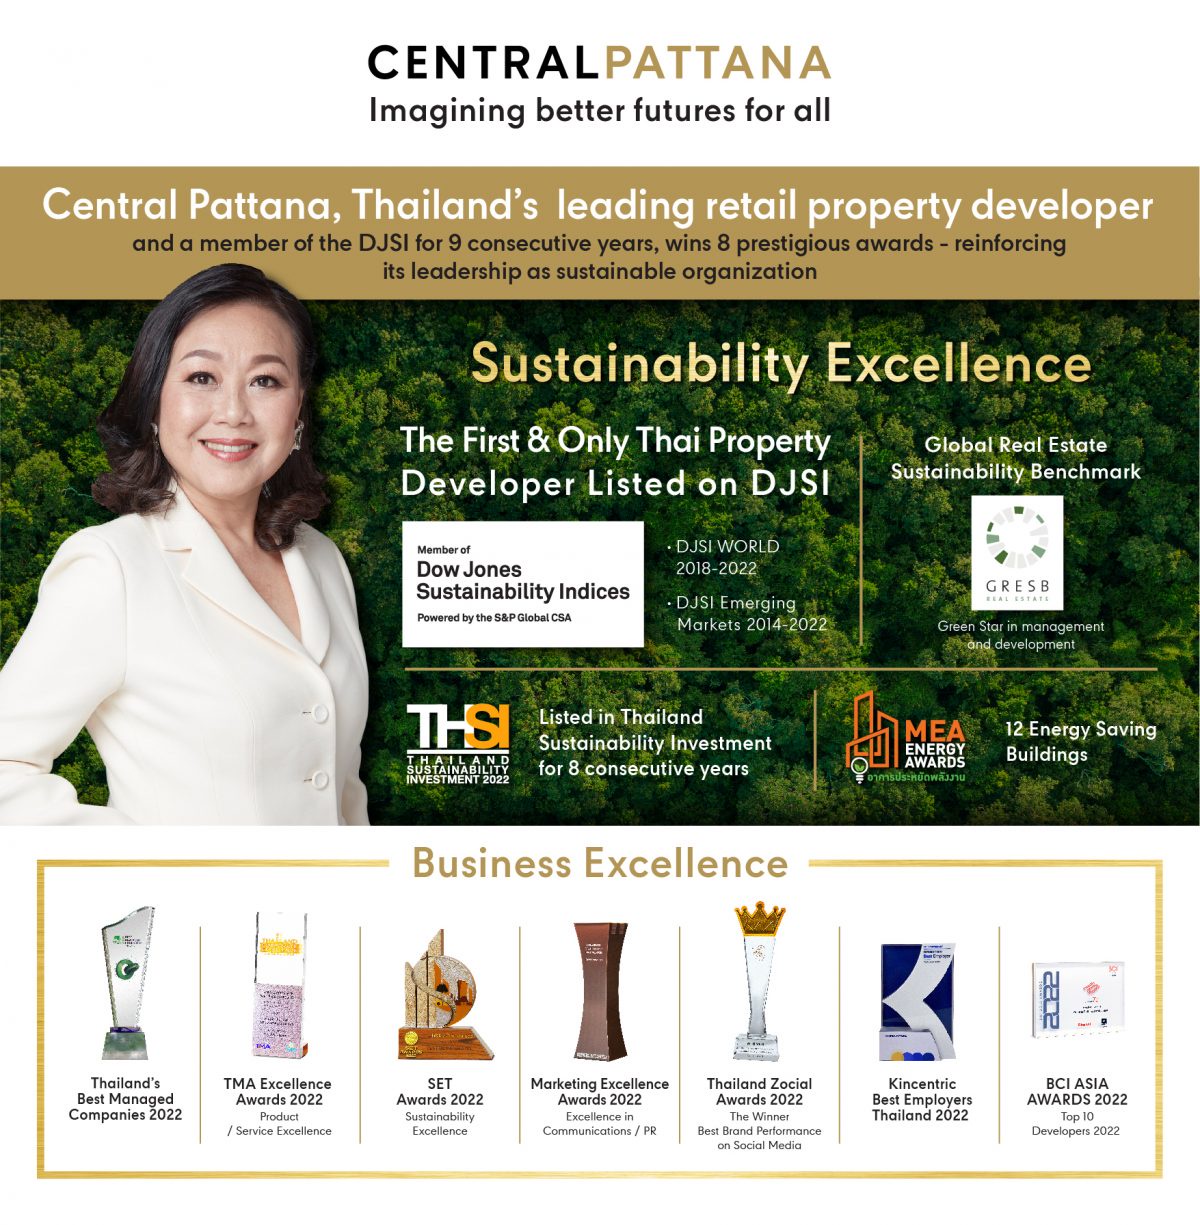 Central Pattana, Thailand's leading retail property developer and a member of DJSI for 9 consecutive years, wins 8 prestigious awards in 2022